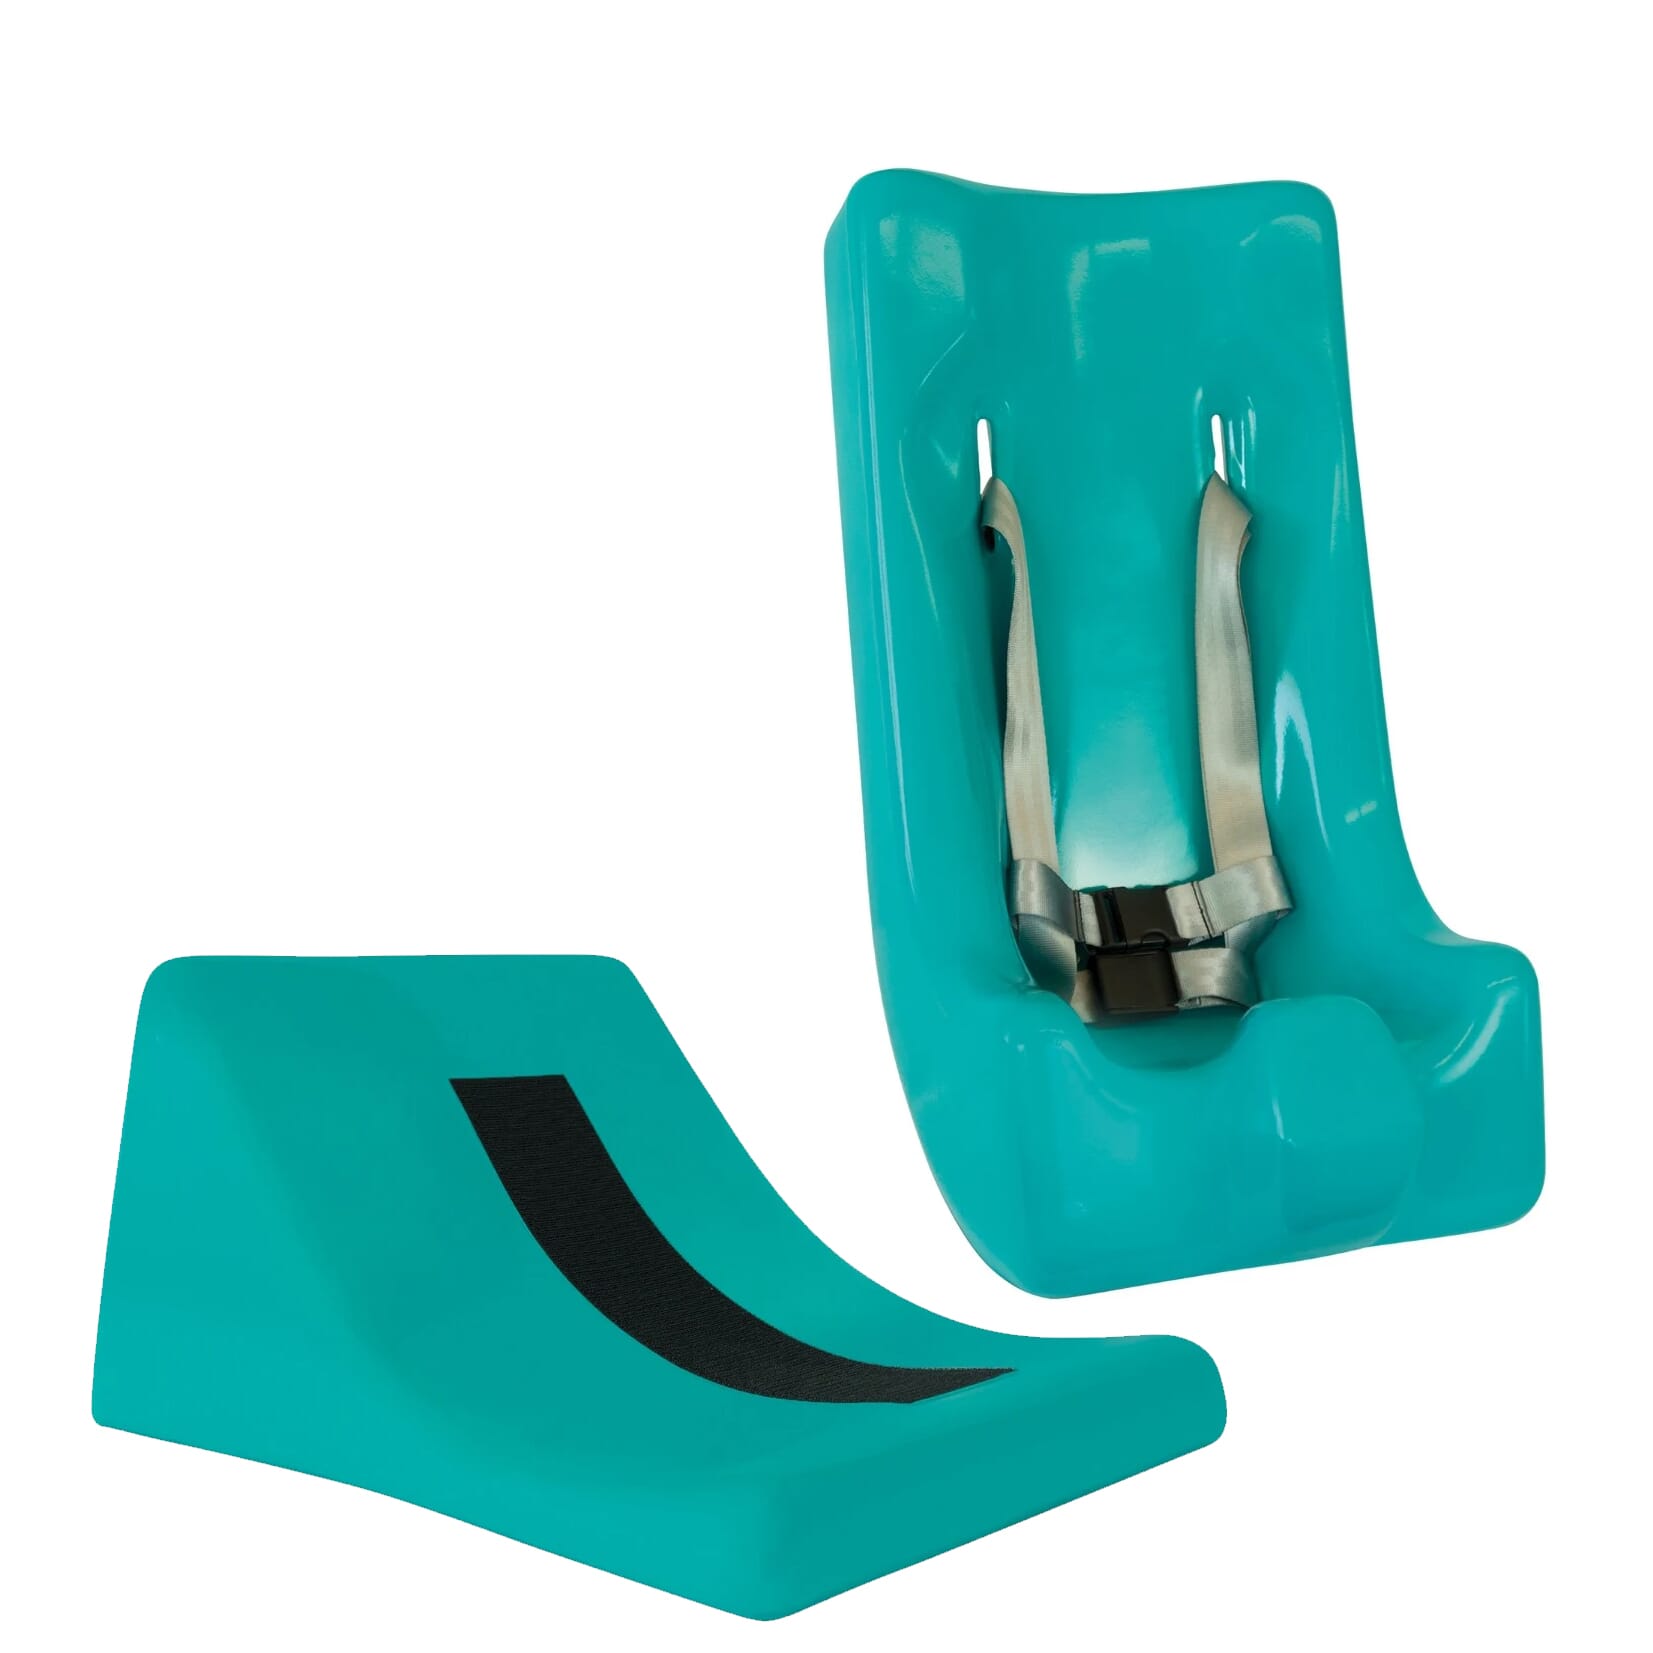 View Tumble Forms Deluxe Floor Sitter Set Medium Teal information